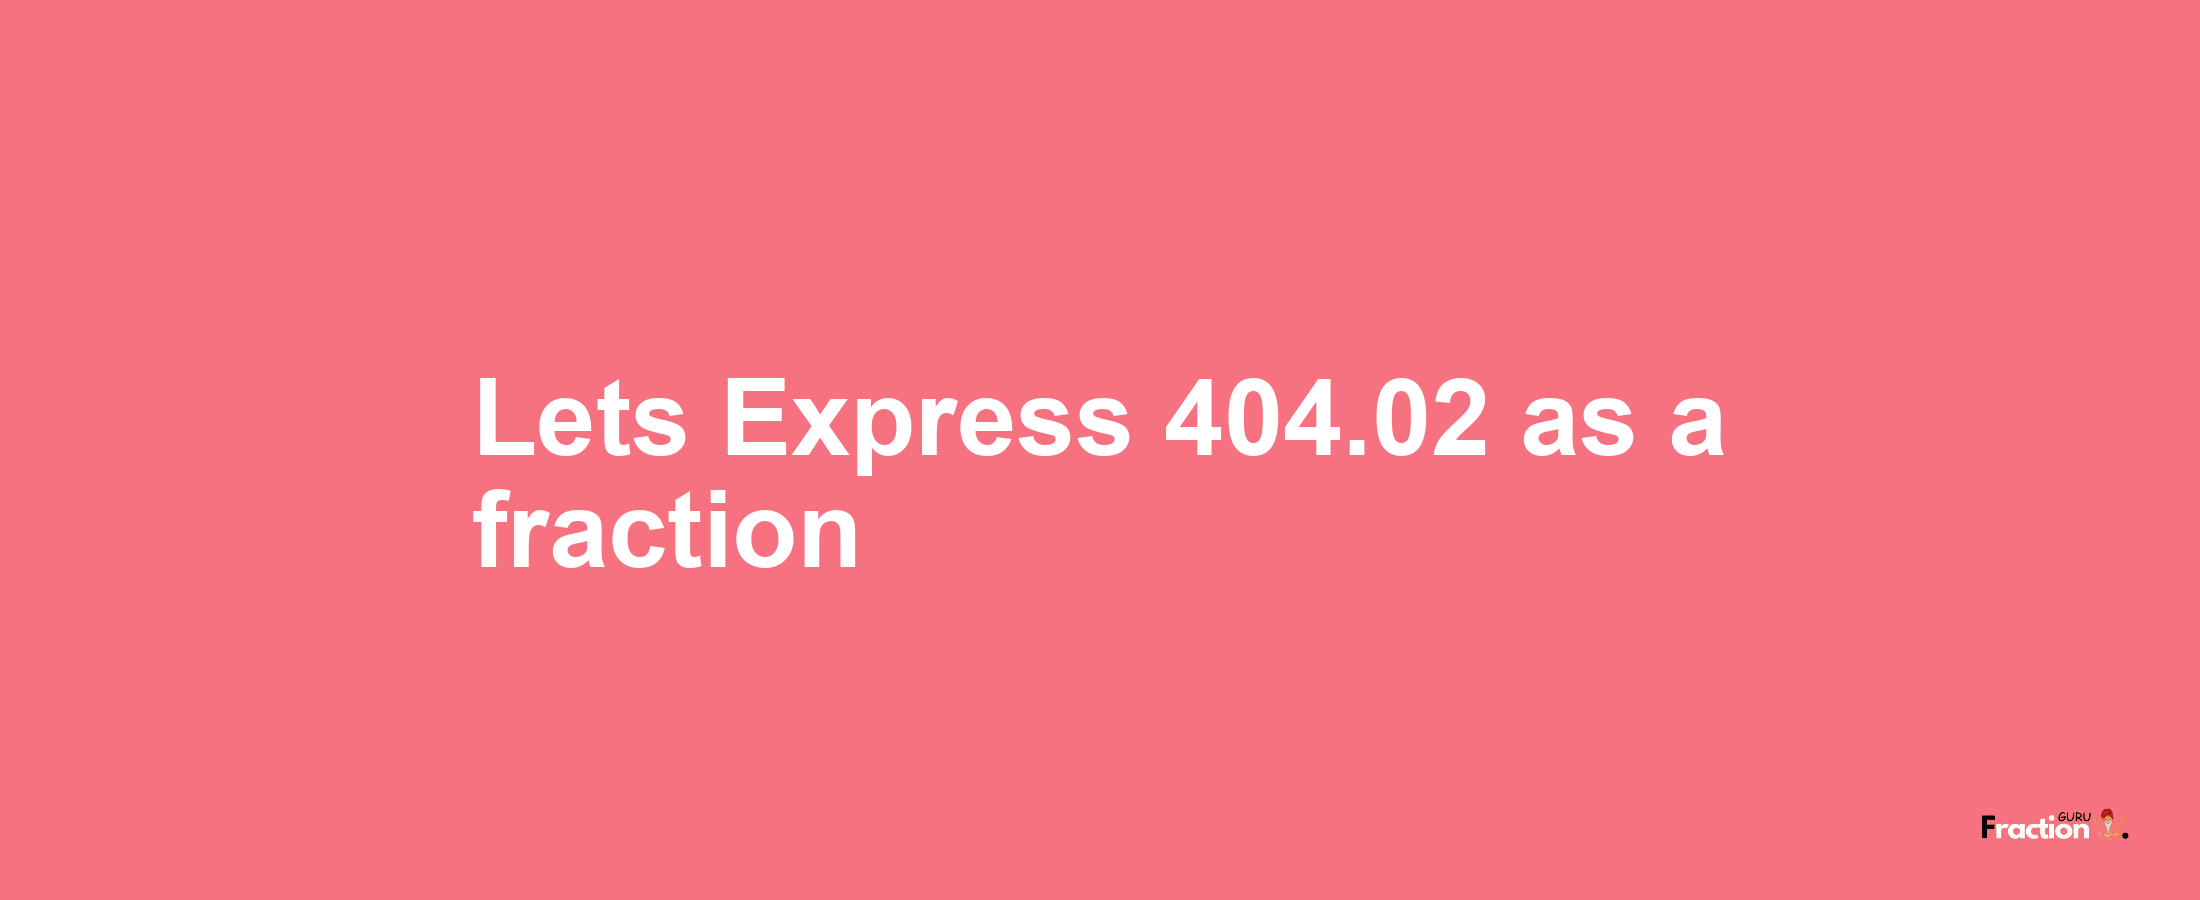 Lets Express 404.02 as afraction